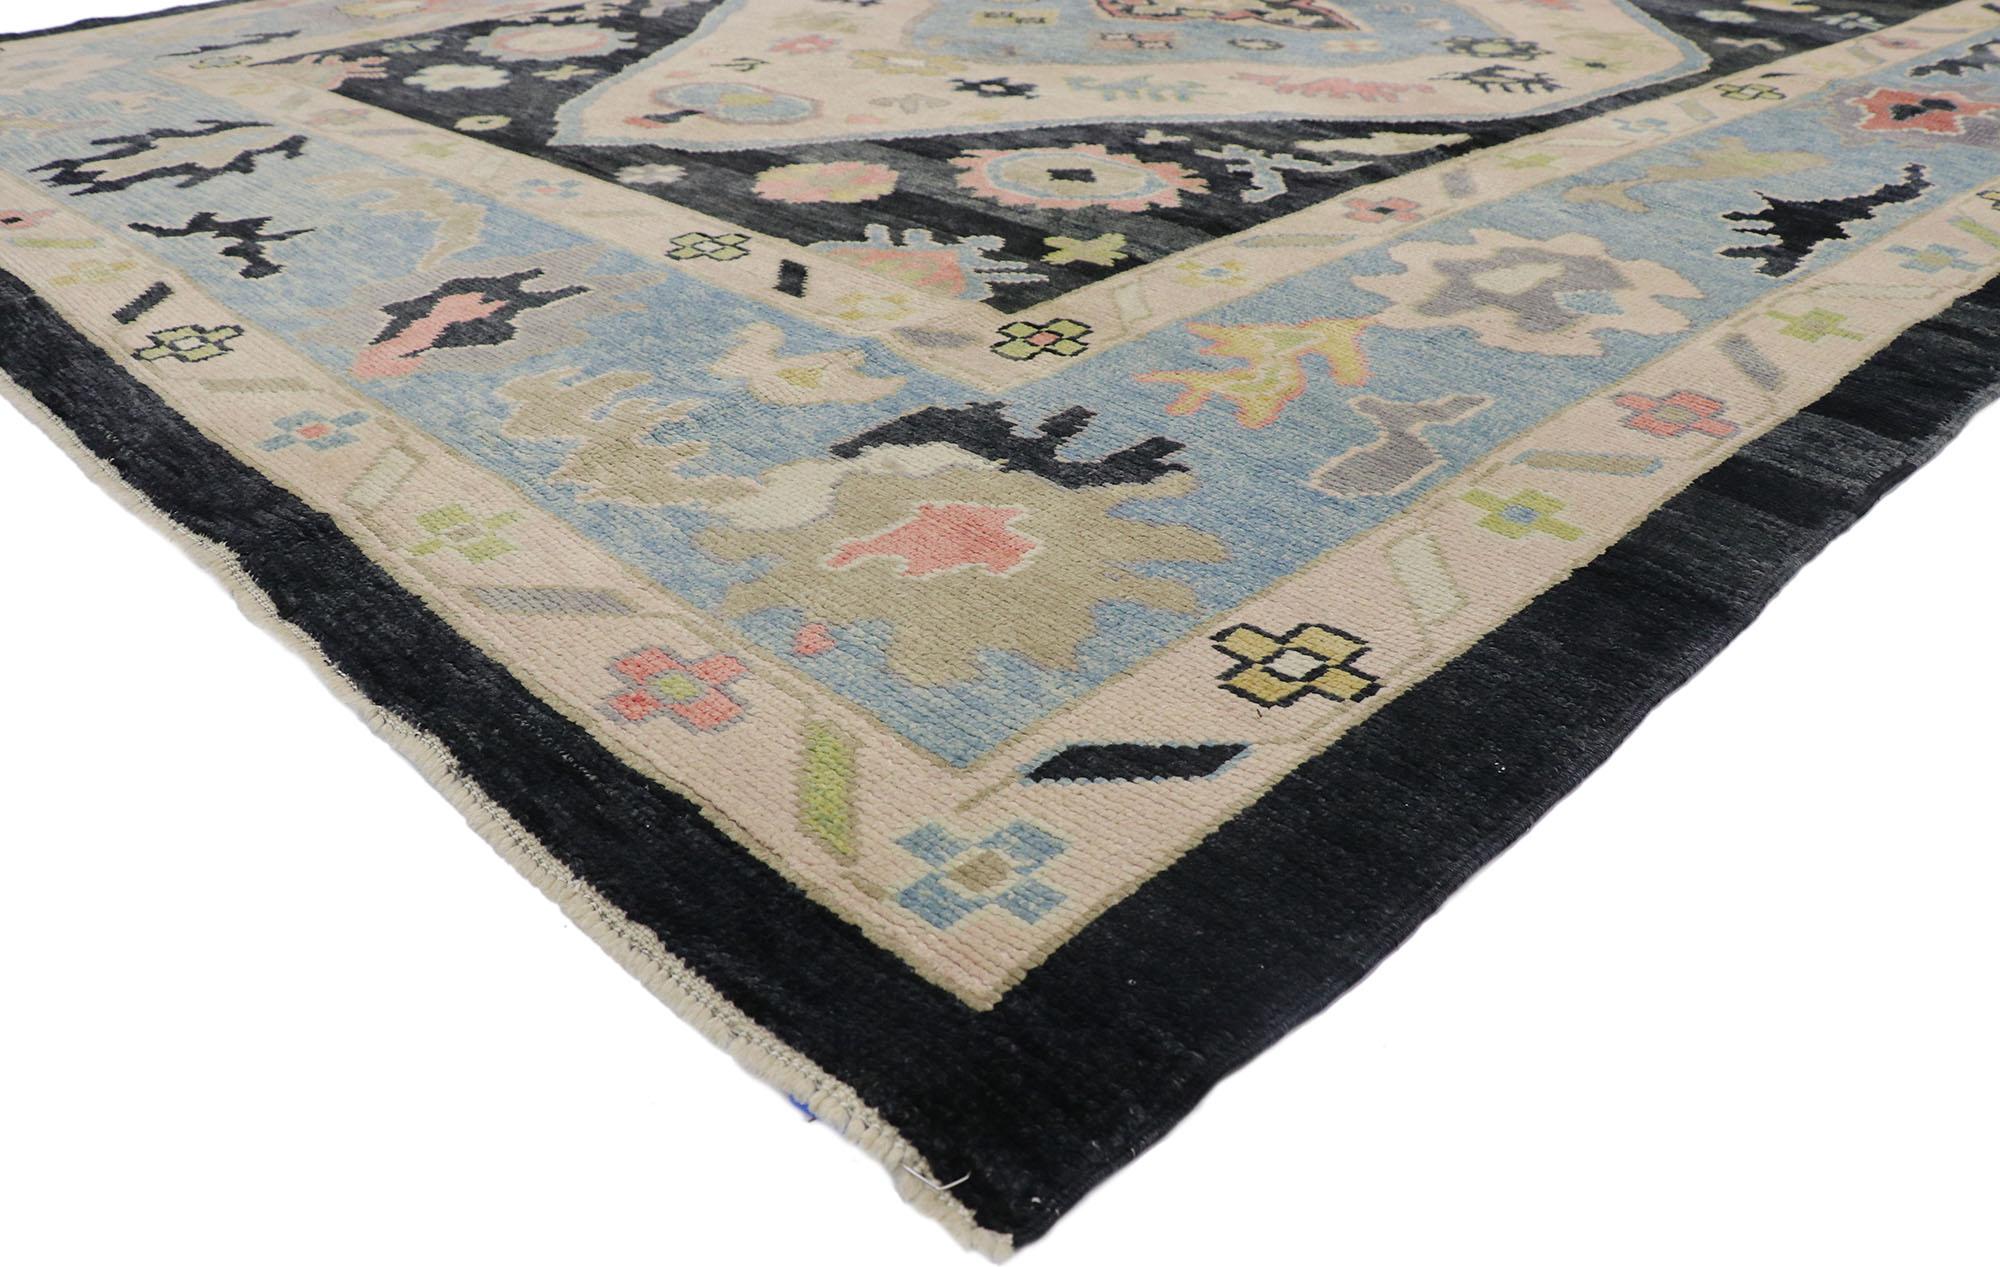 52732 new contemporary Turkish Oushak rug with Modern style 08'05 x 12'03. Blending elements from the modern world with contrasting colors, this hand knotted wool contemporary Turkish Oushak style area rug will boost the coziness factor in nearly